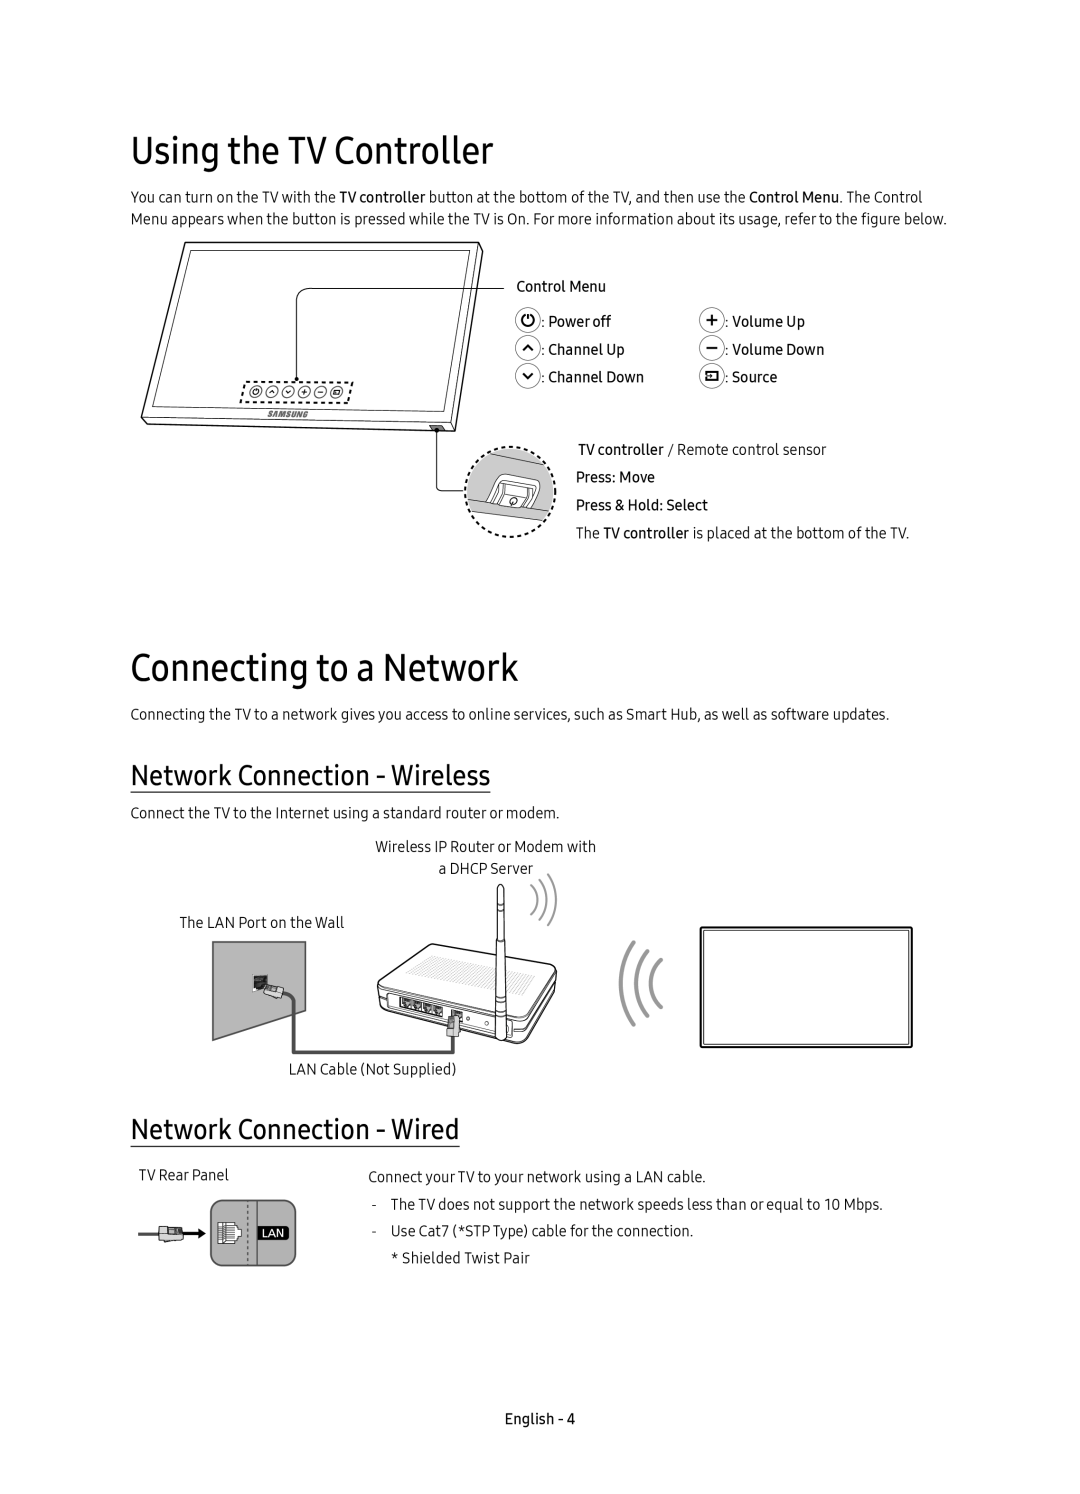 Samsung UE49KS7580UXZG manual Using the TV Controller, Connecting to a Network, Network Connection - Wireless, Control Menu 